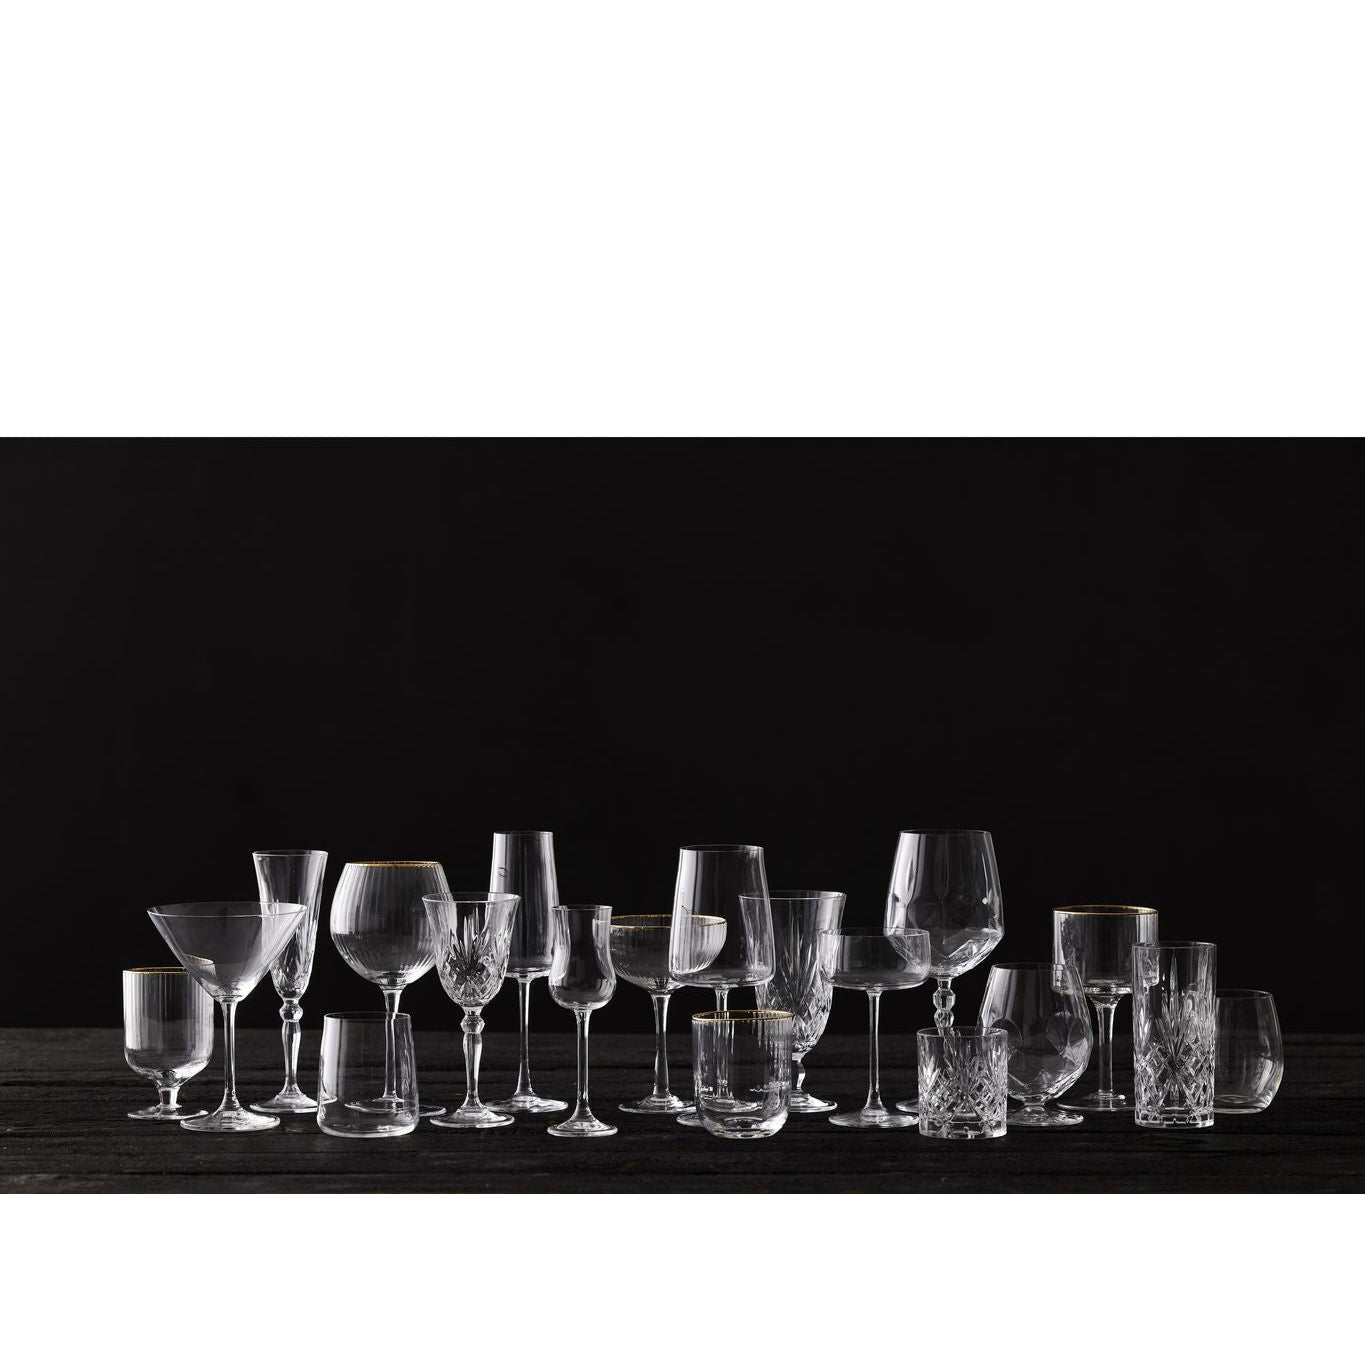 Lyngby Glas Palermo Gold Wine Glass 30 Cl，4台。